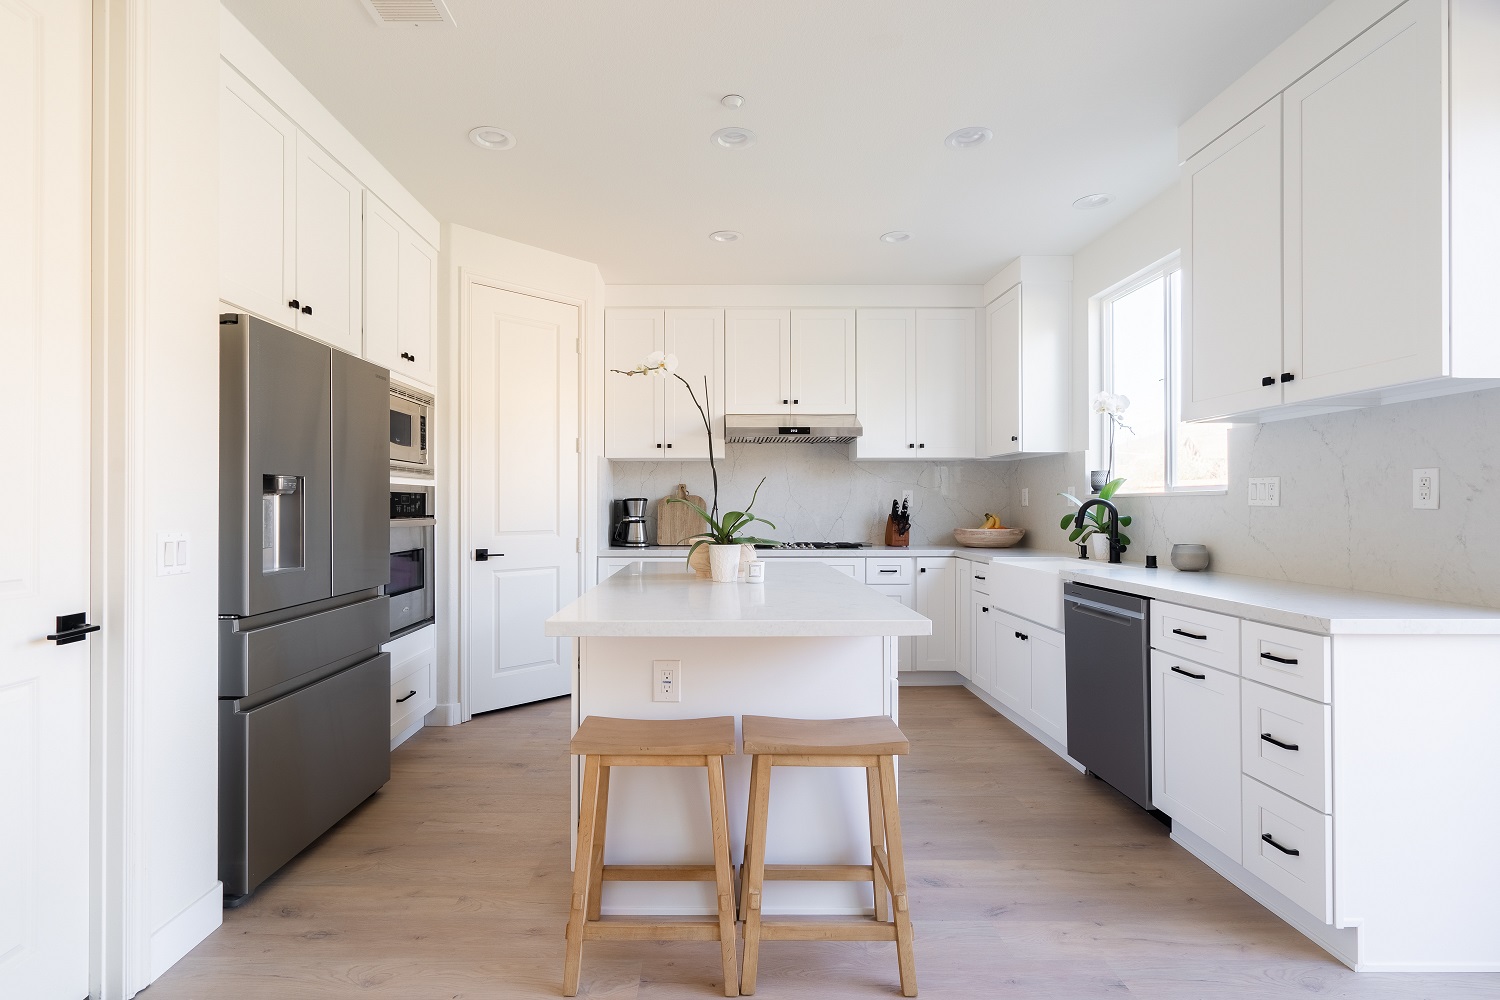 San Diego kitchen remodeling specialists